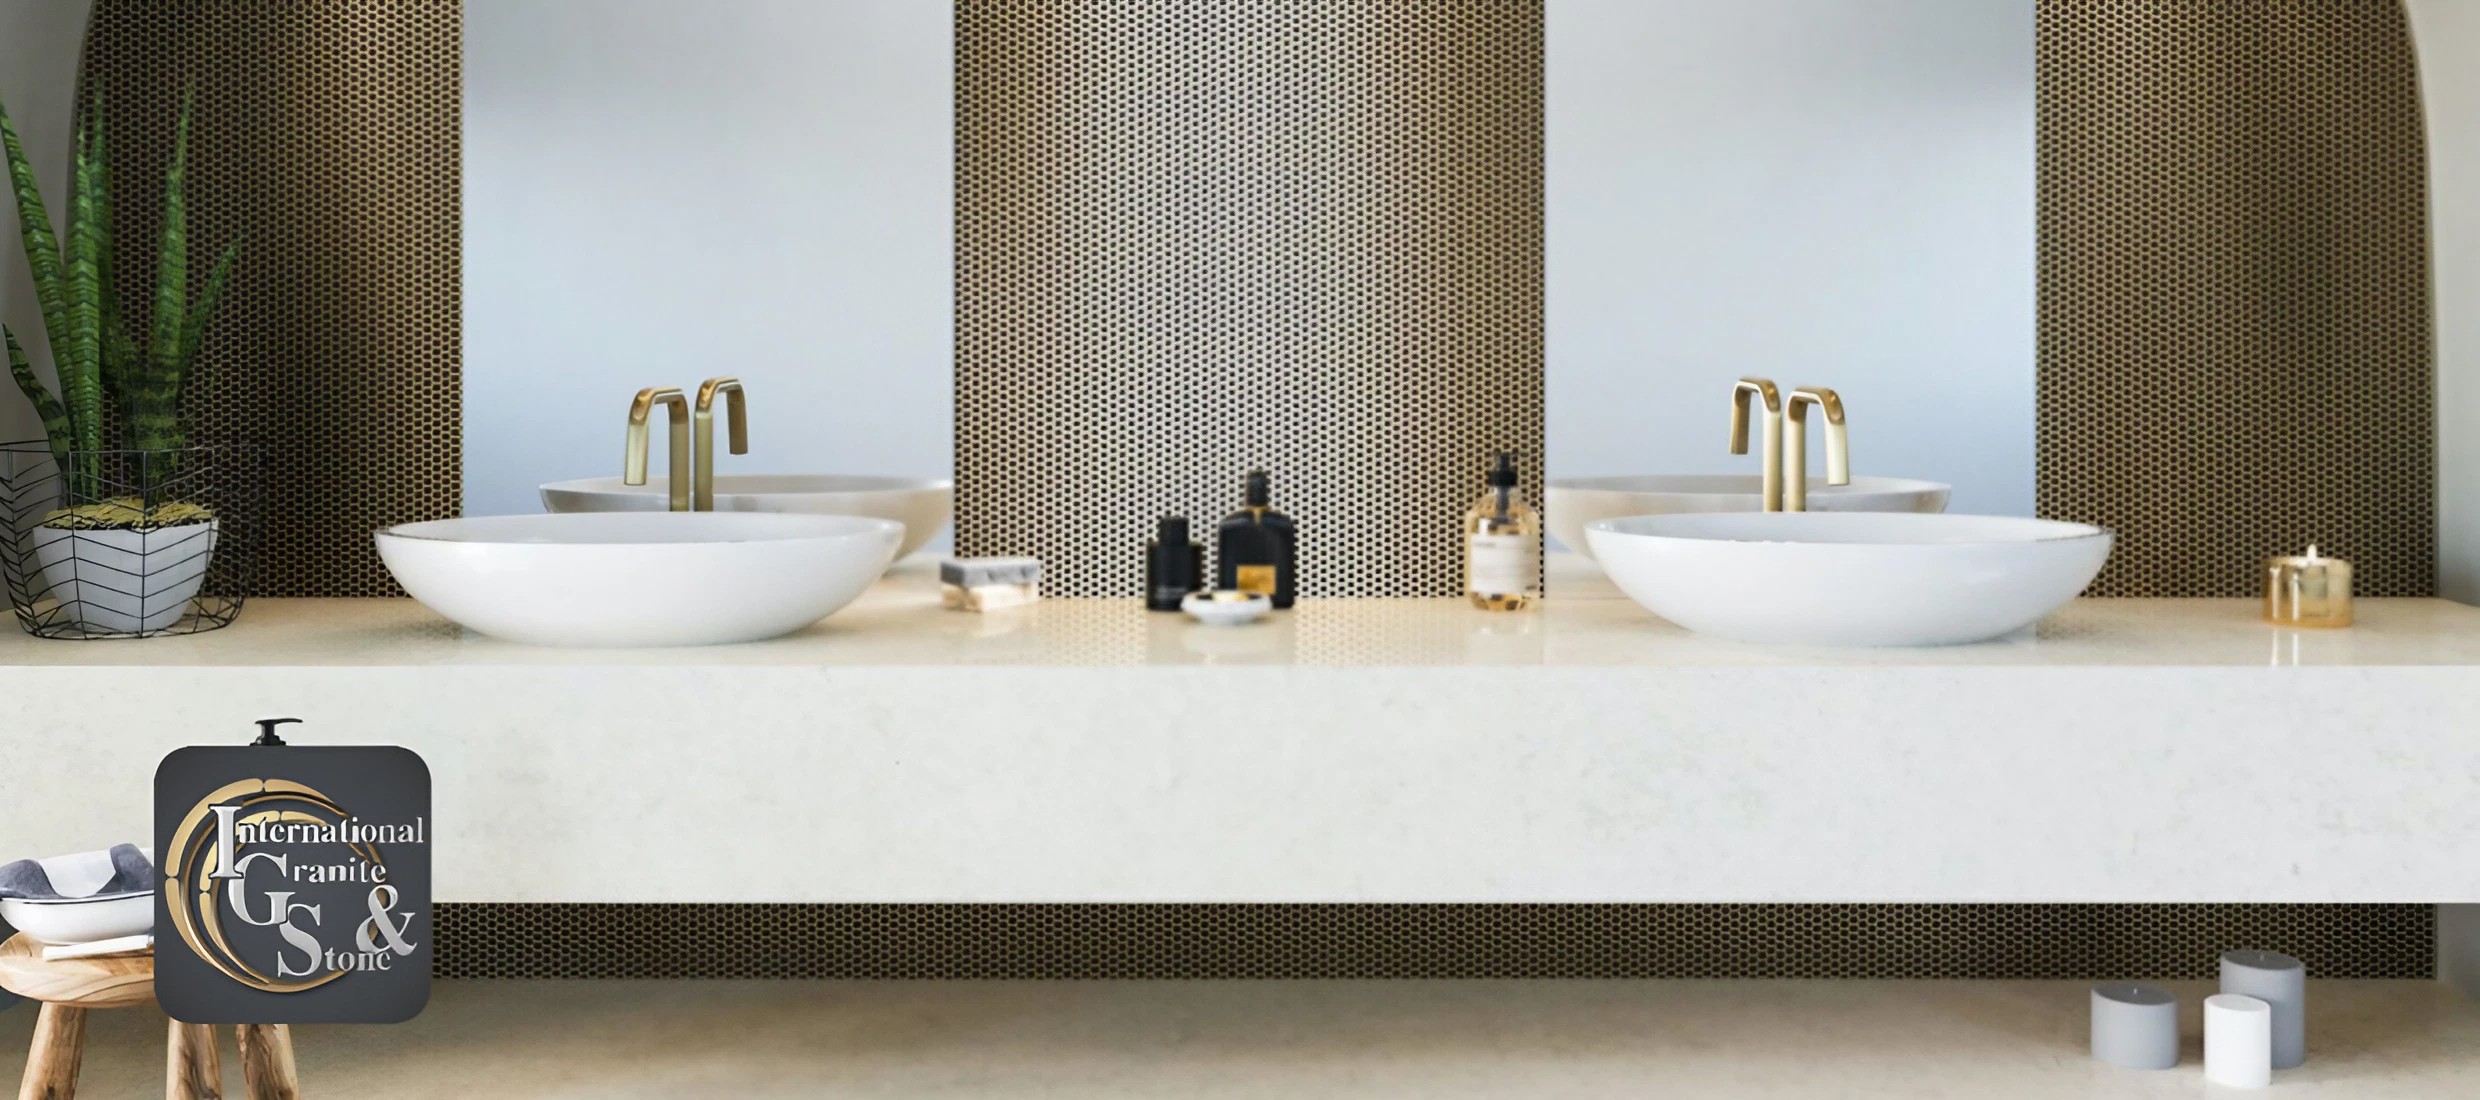 Image showcasing an array of bathroom countertops by IGS Countertops, complemented by an assortment of remnants and leftover pieces, illustrating the variety and potential applications of the materials.